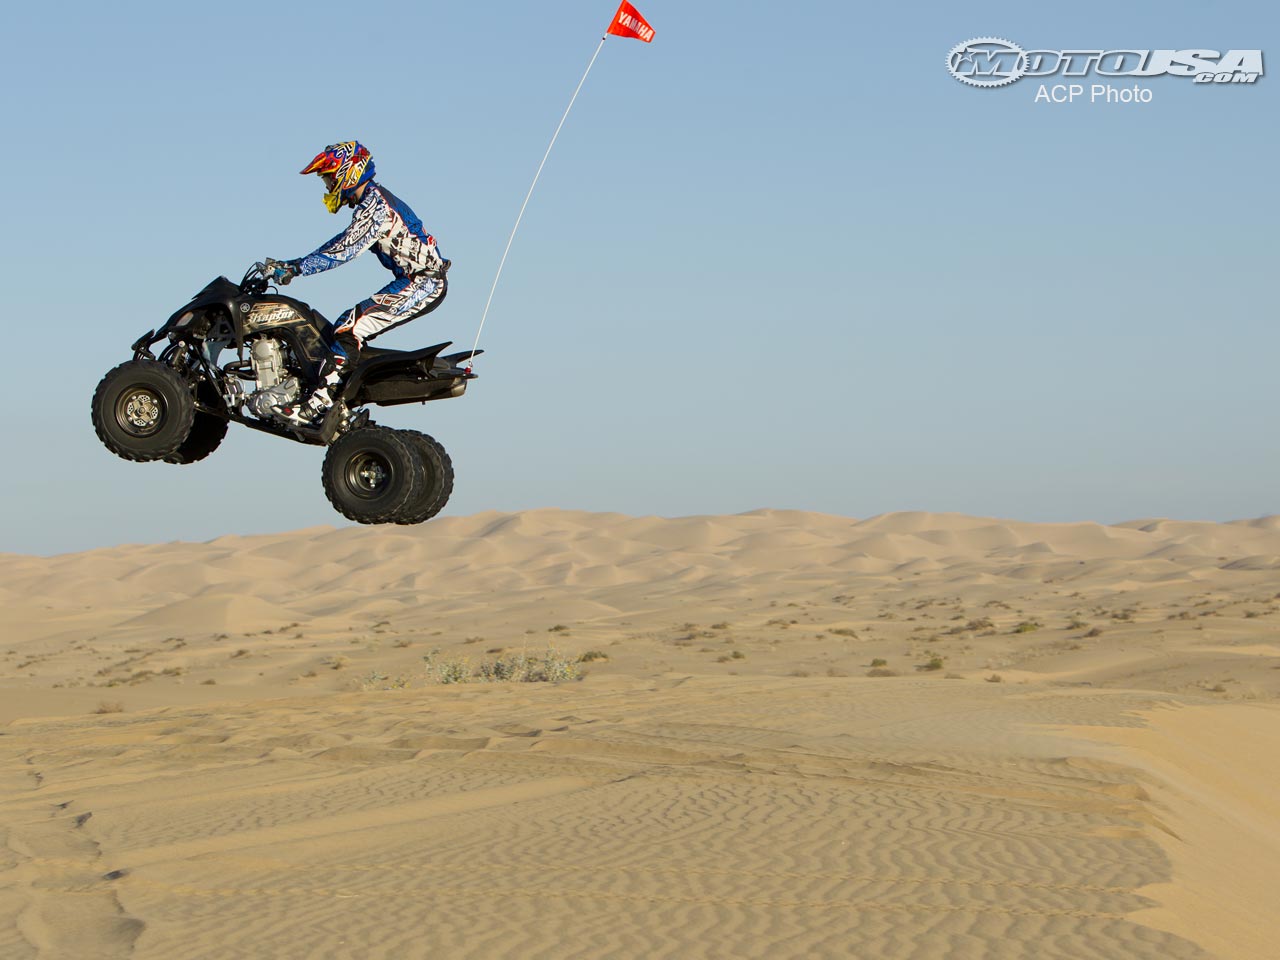 Yamaha Sport Atv Glamis Ride Picture Of Motorcycle Usa